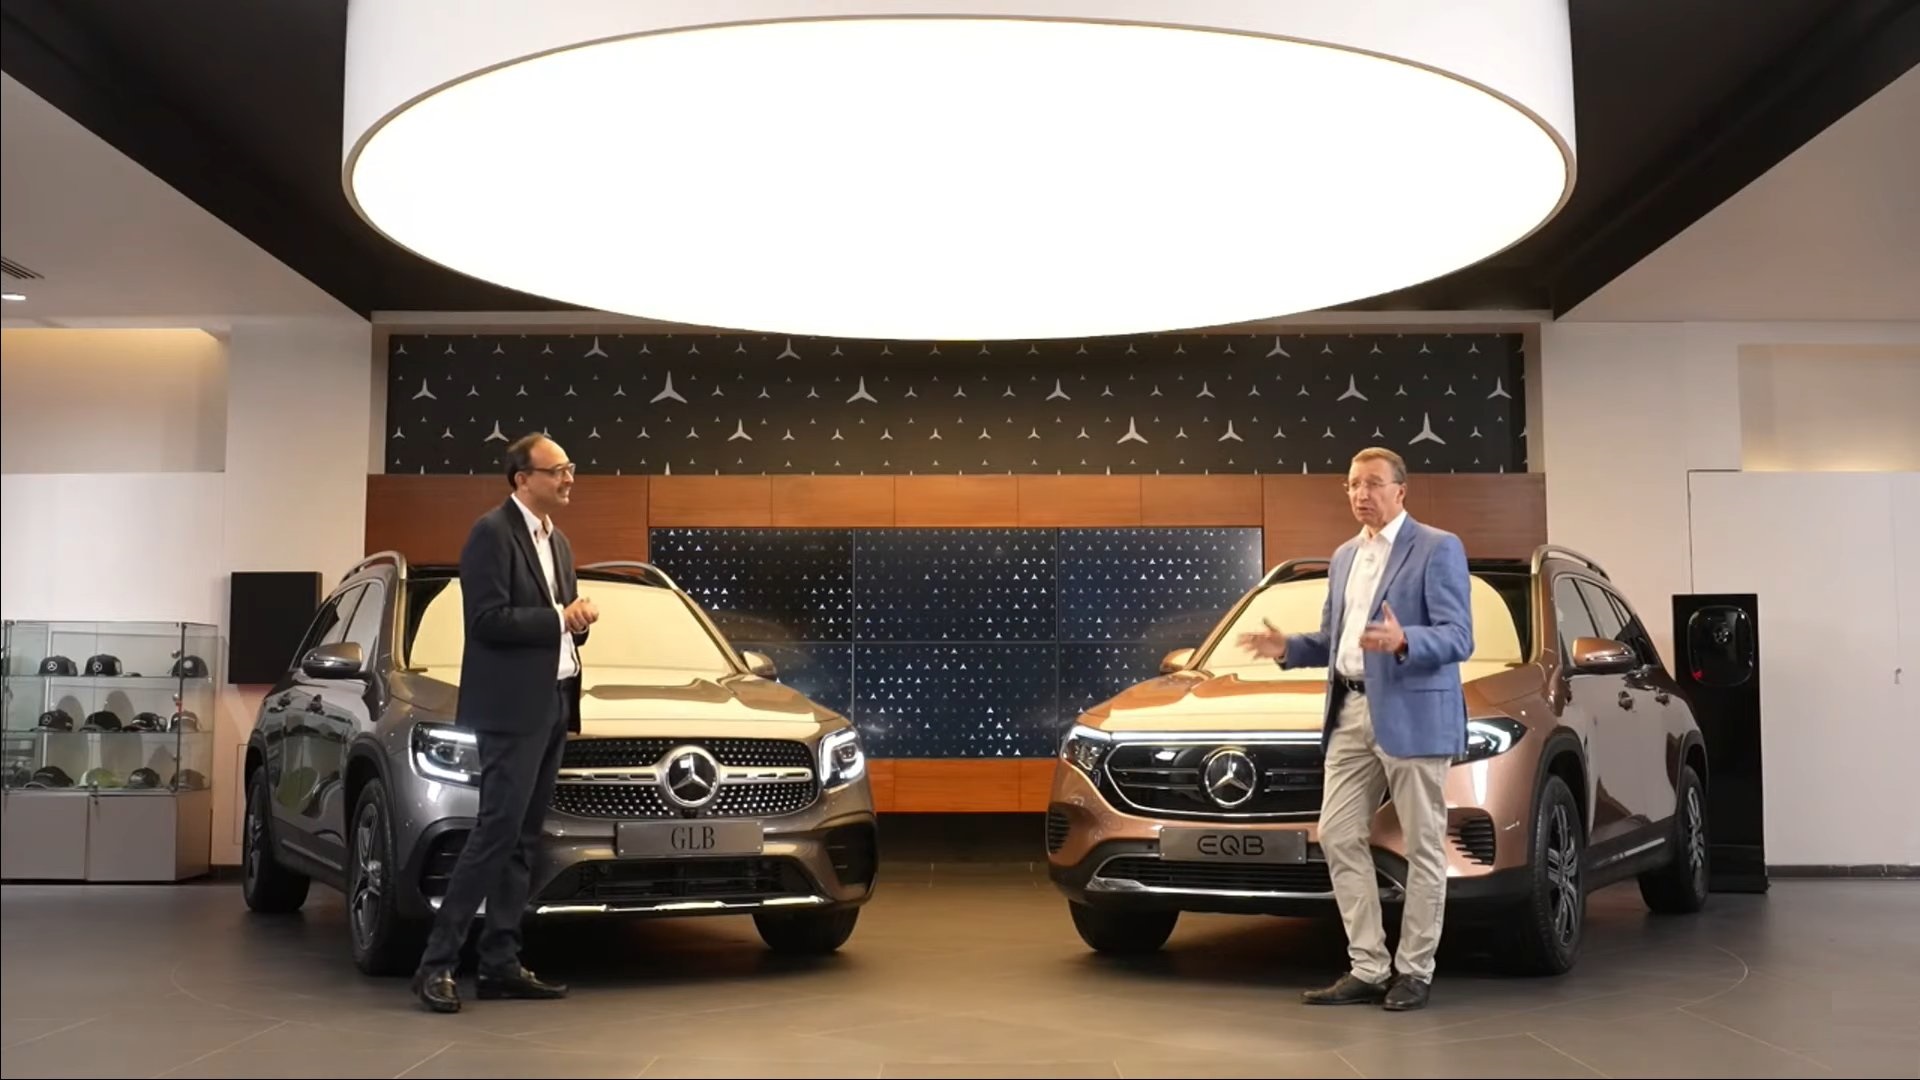 https://e-vehicleinfo.com/mercedes-benz-eqb-luxury-electric-suv-launched-in-india/
